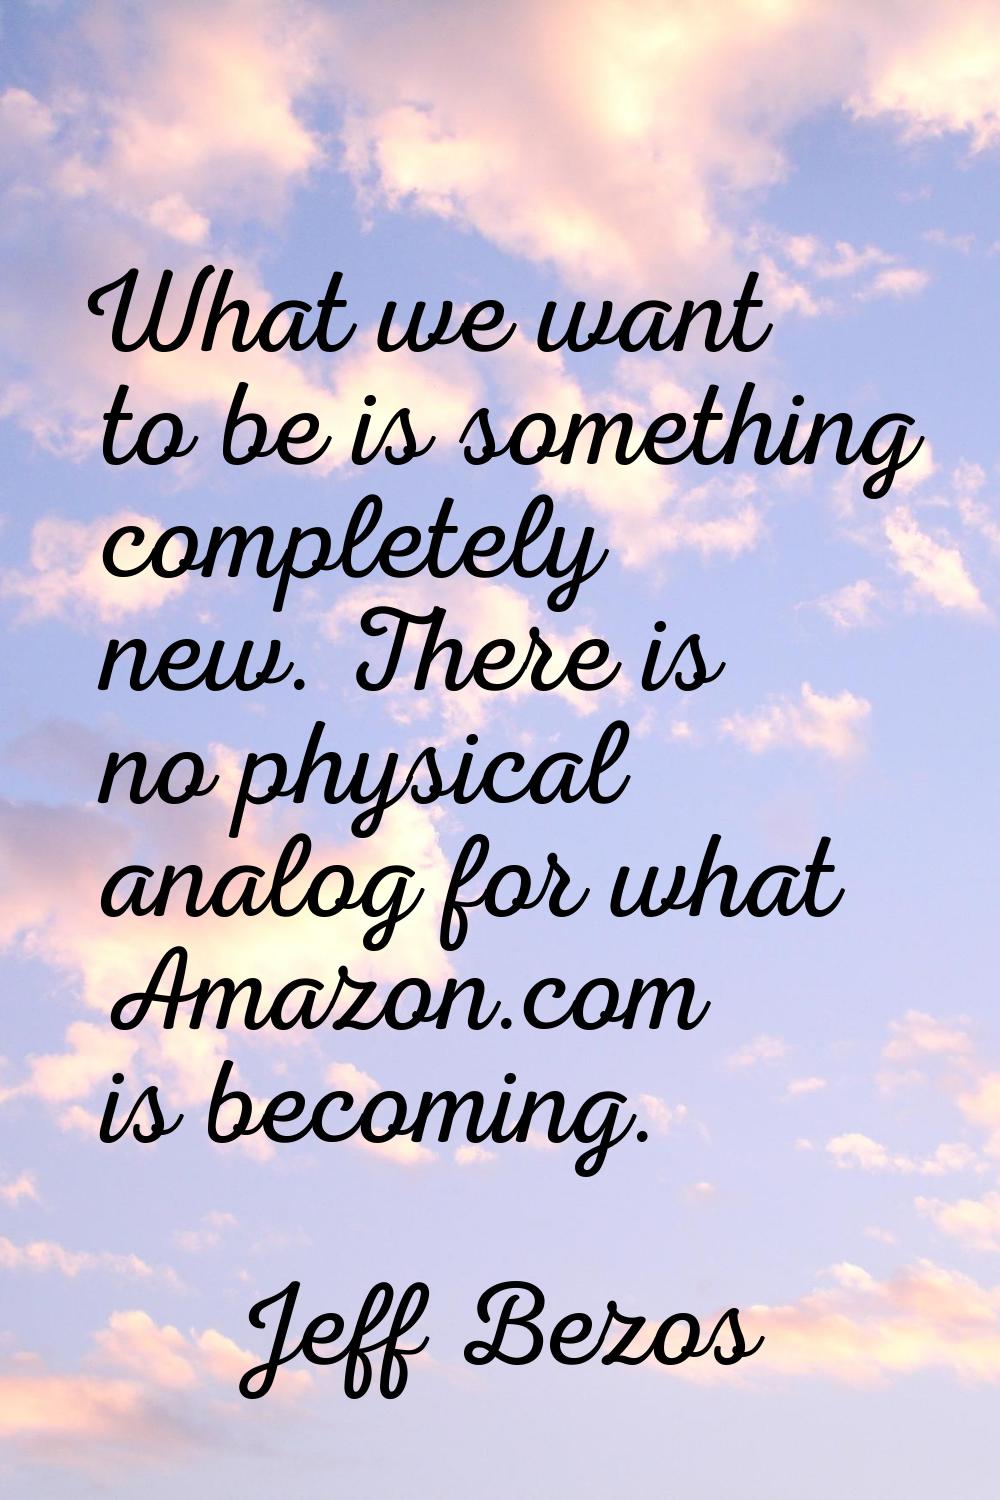 What we want to be is something completely new. There is no physical analog for what Amazon.com is 